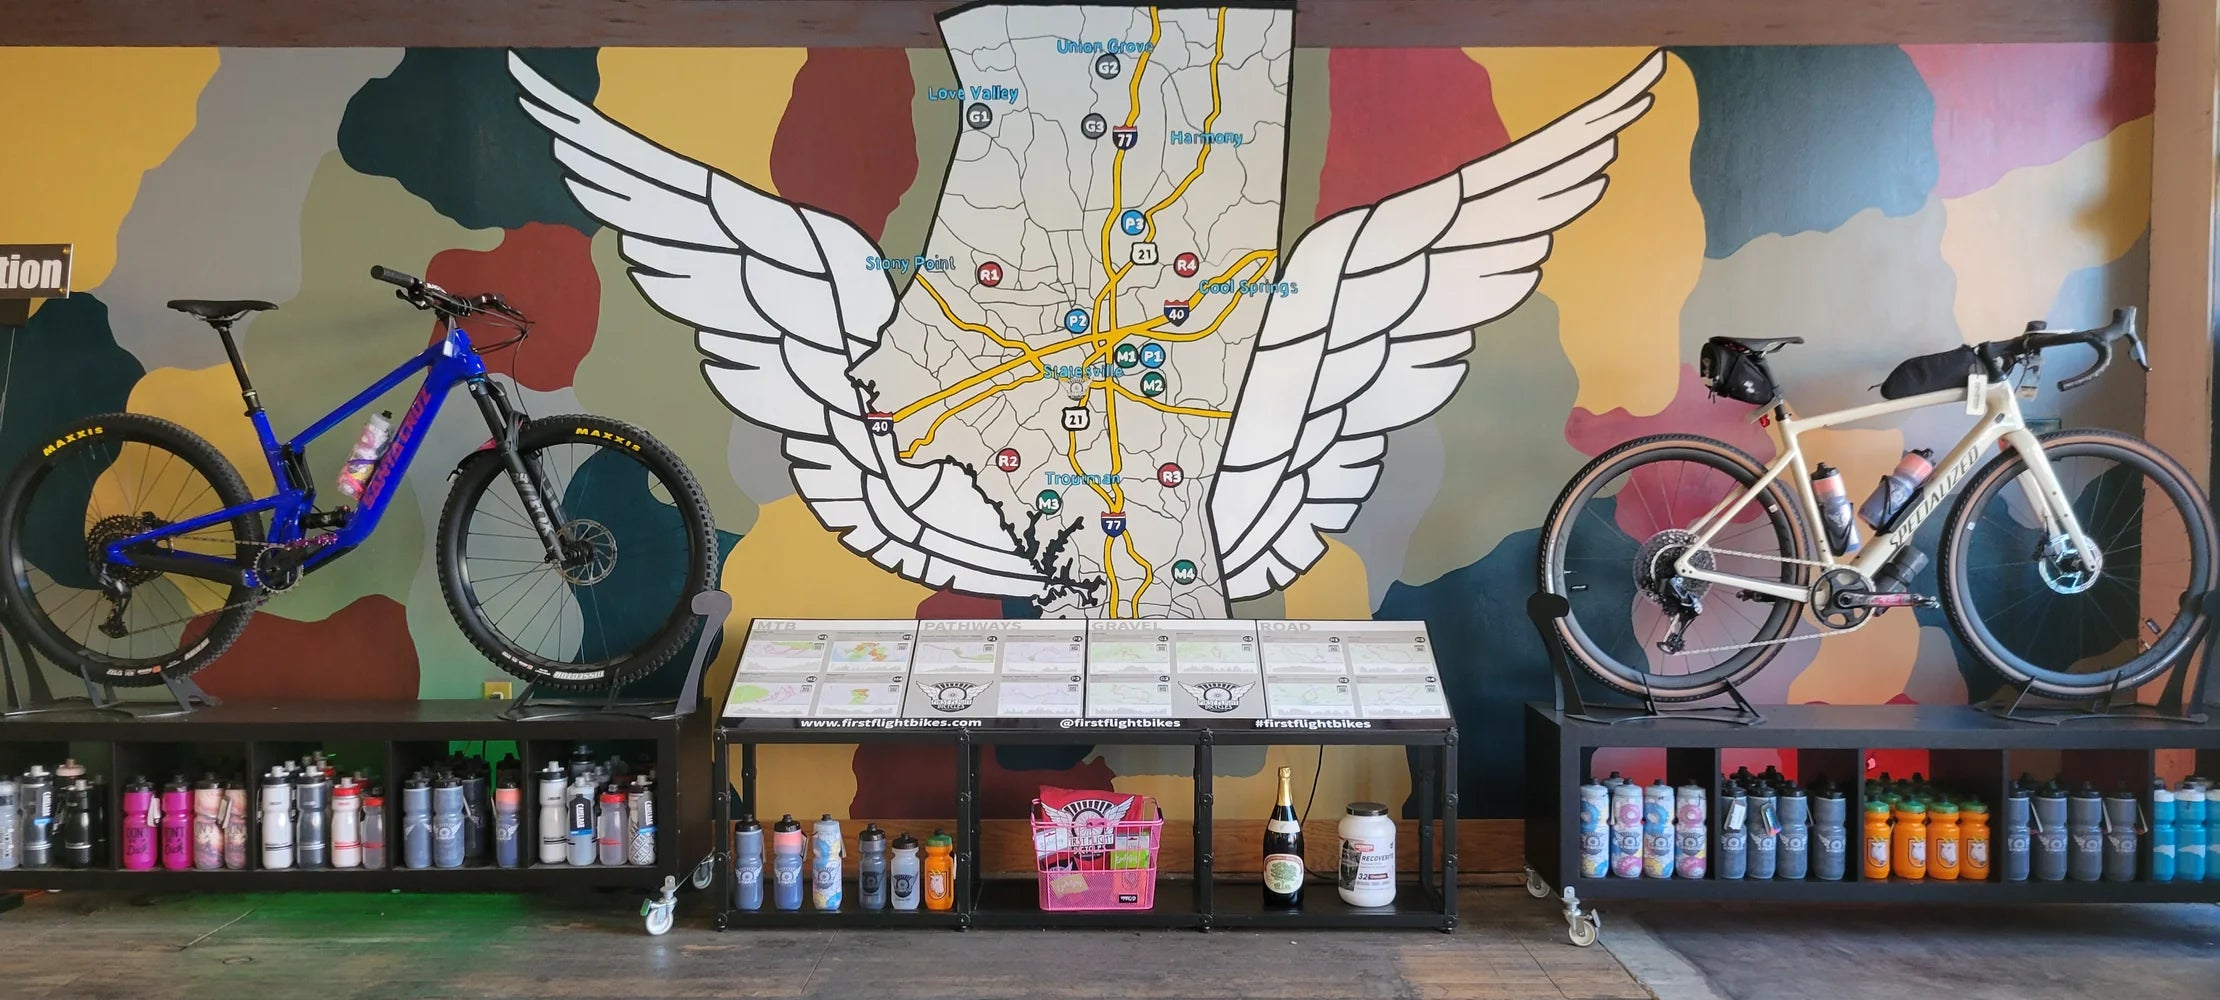 First Flight Bikes, Statesville, NC. Map of Rides painting